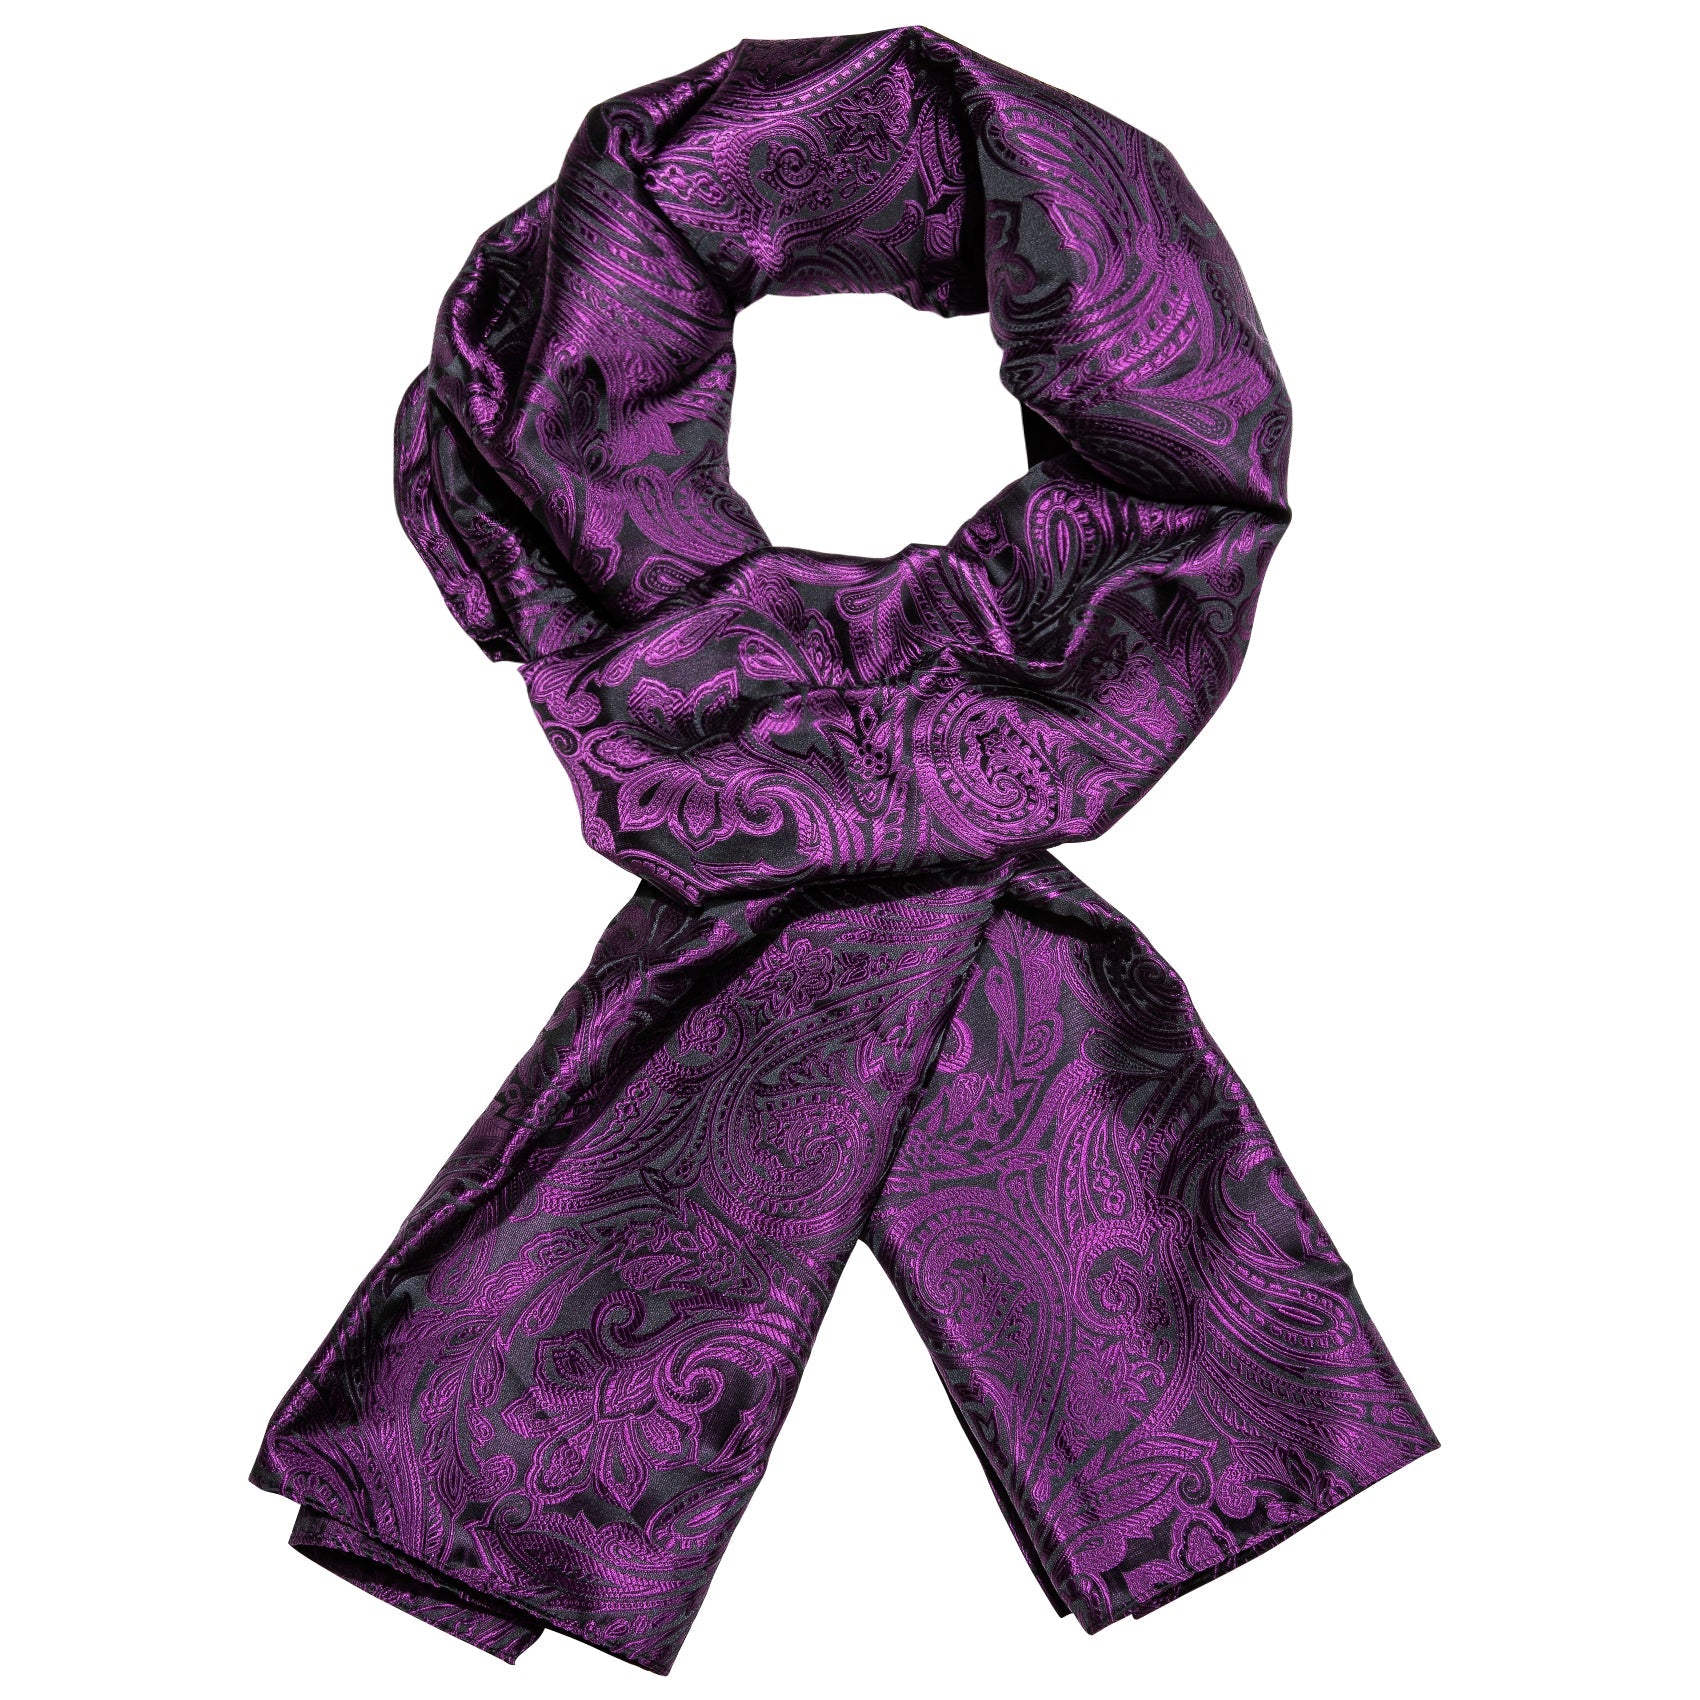 Barry.wang Men's Tie Black Purple Floral Scarf with Tie Set New Fashion